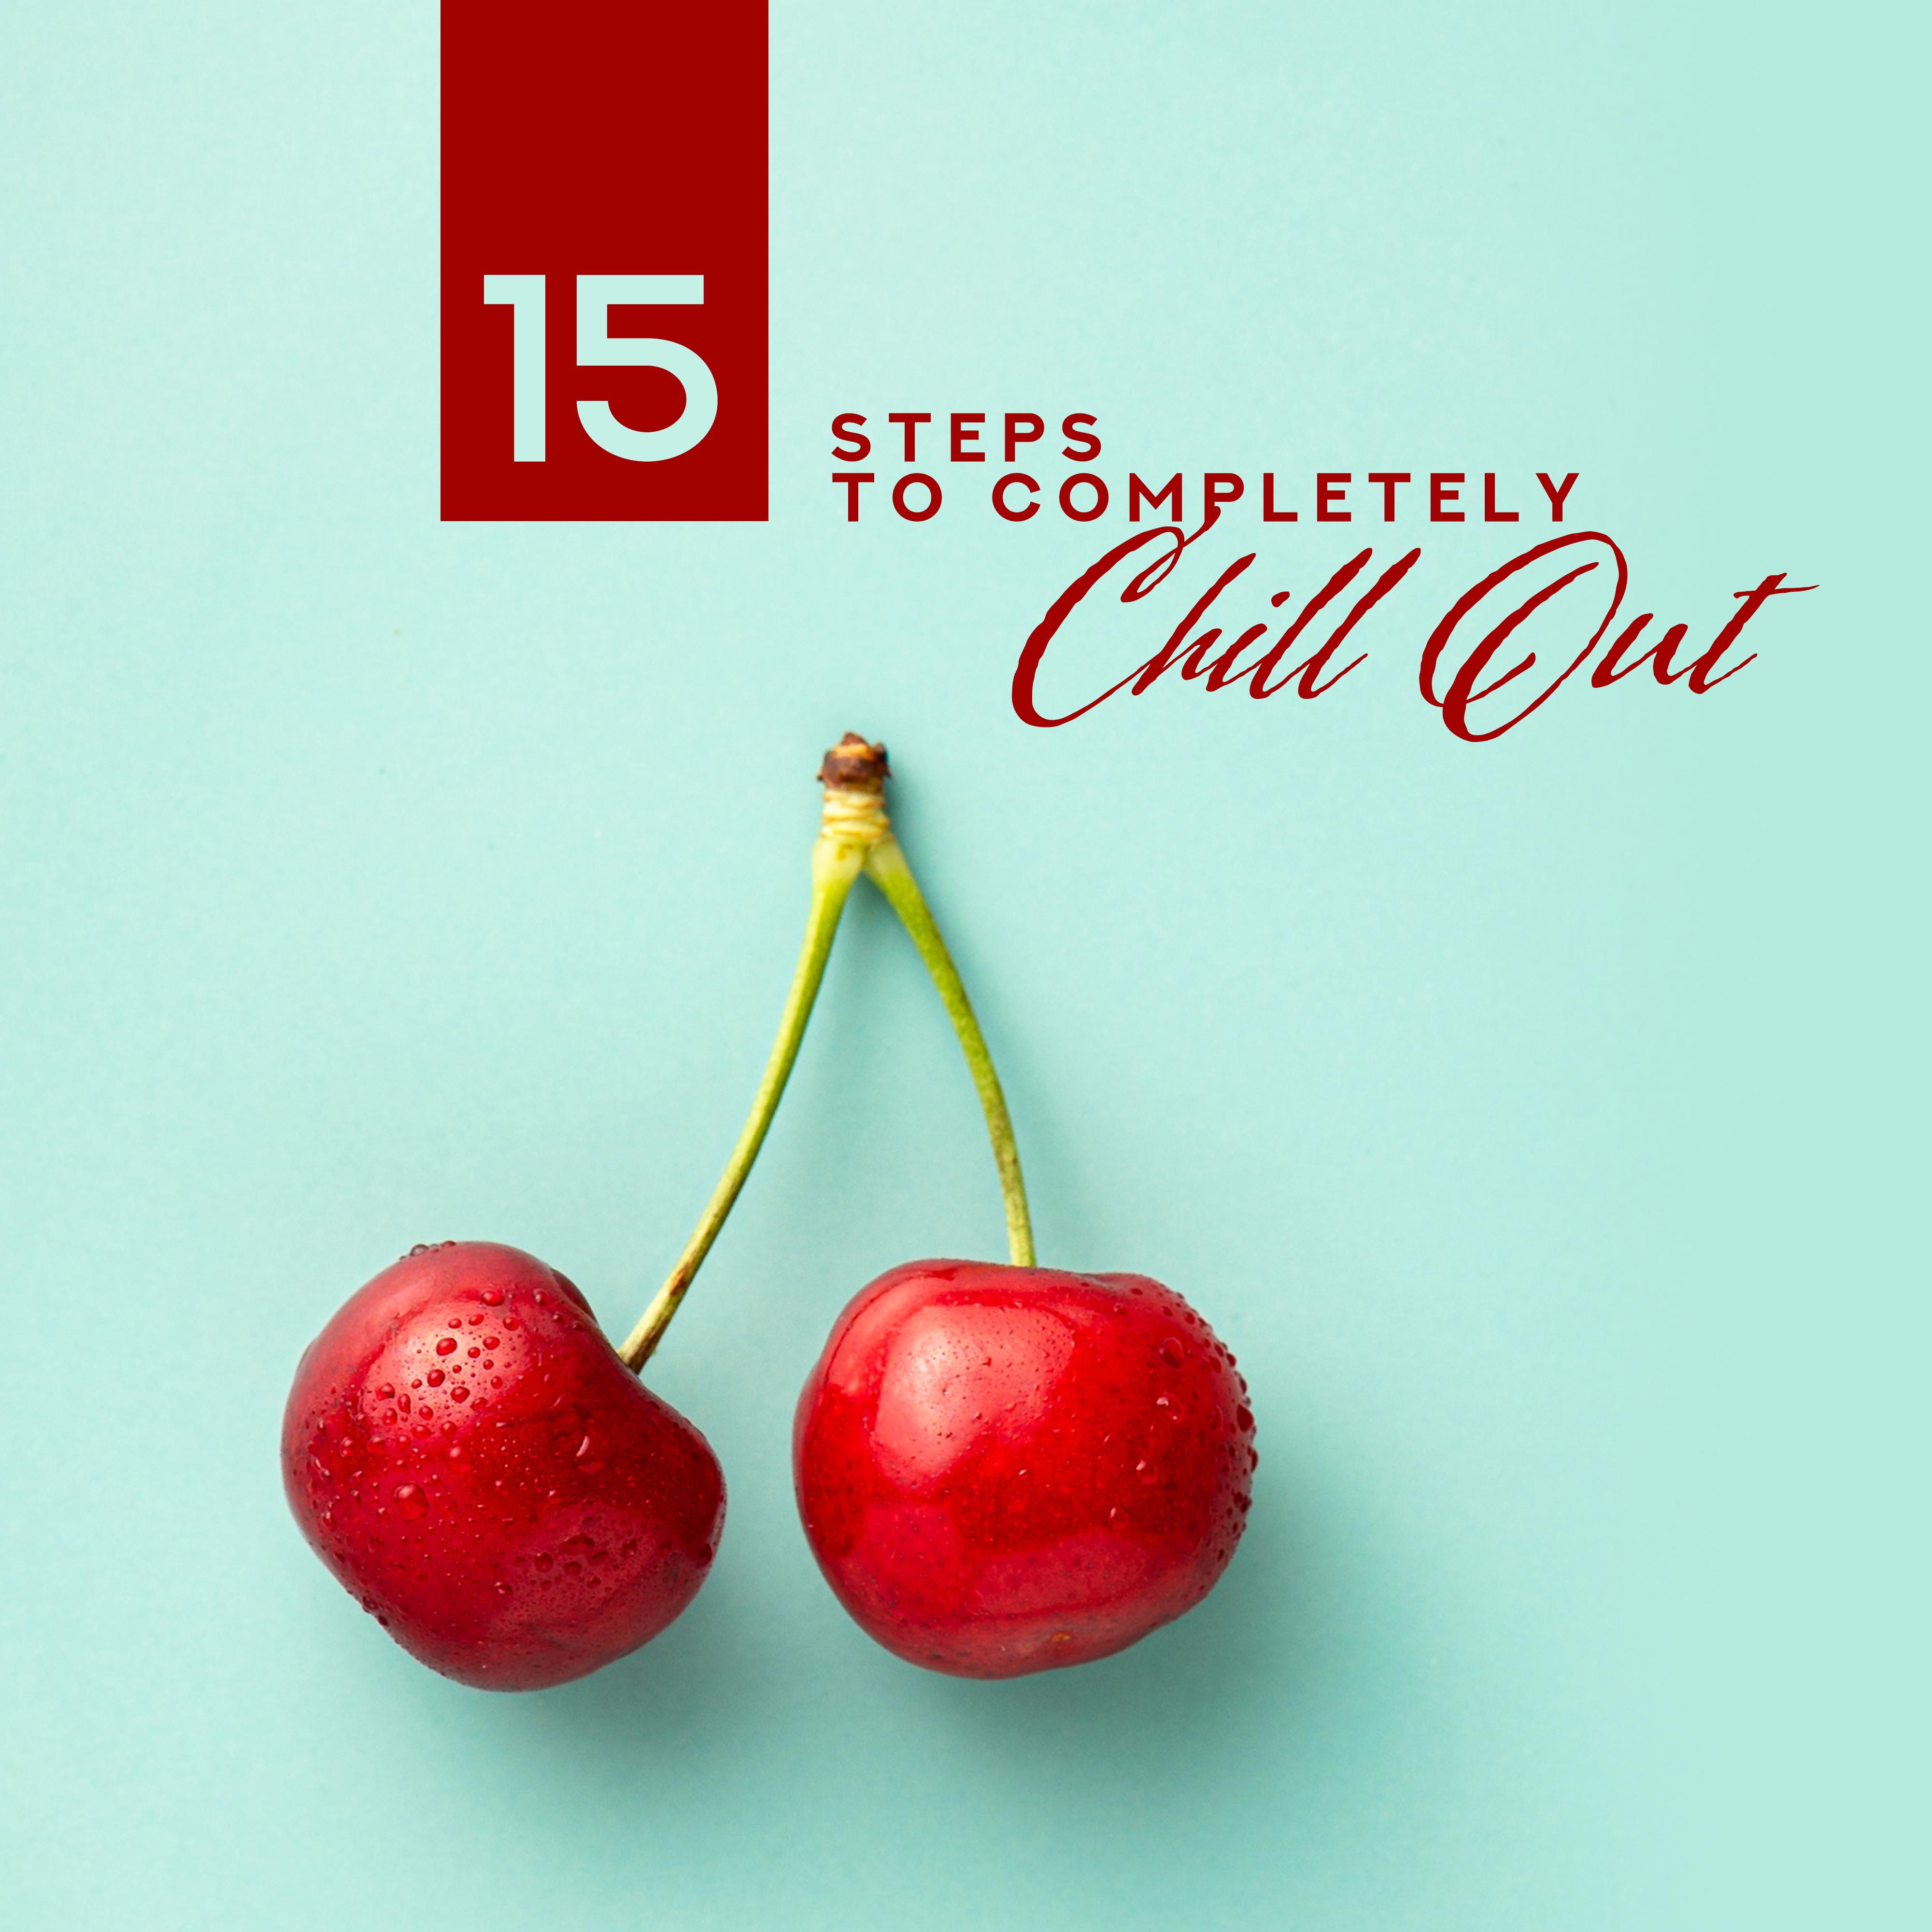 15 Steps to Completely Chill Out